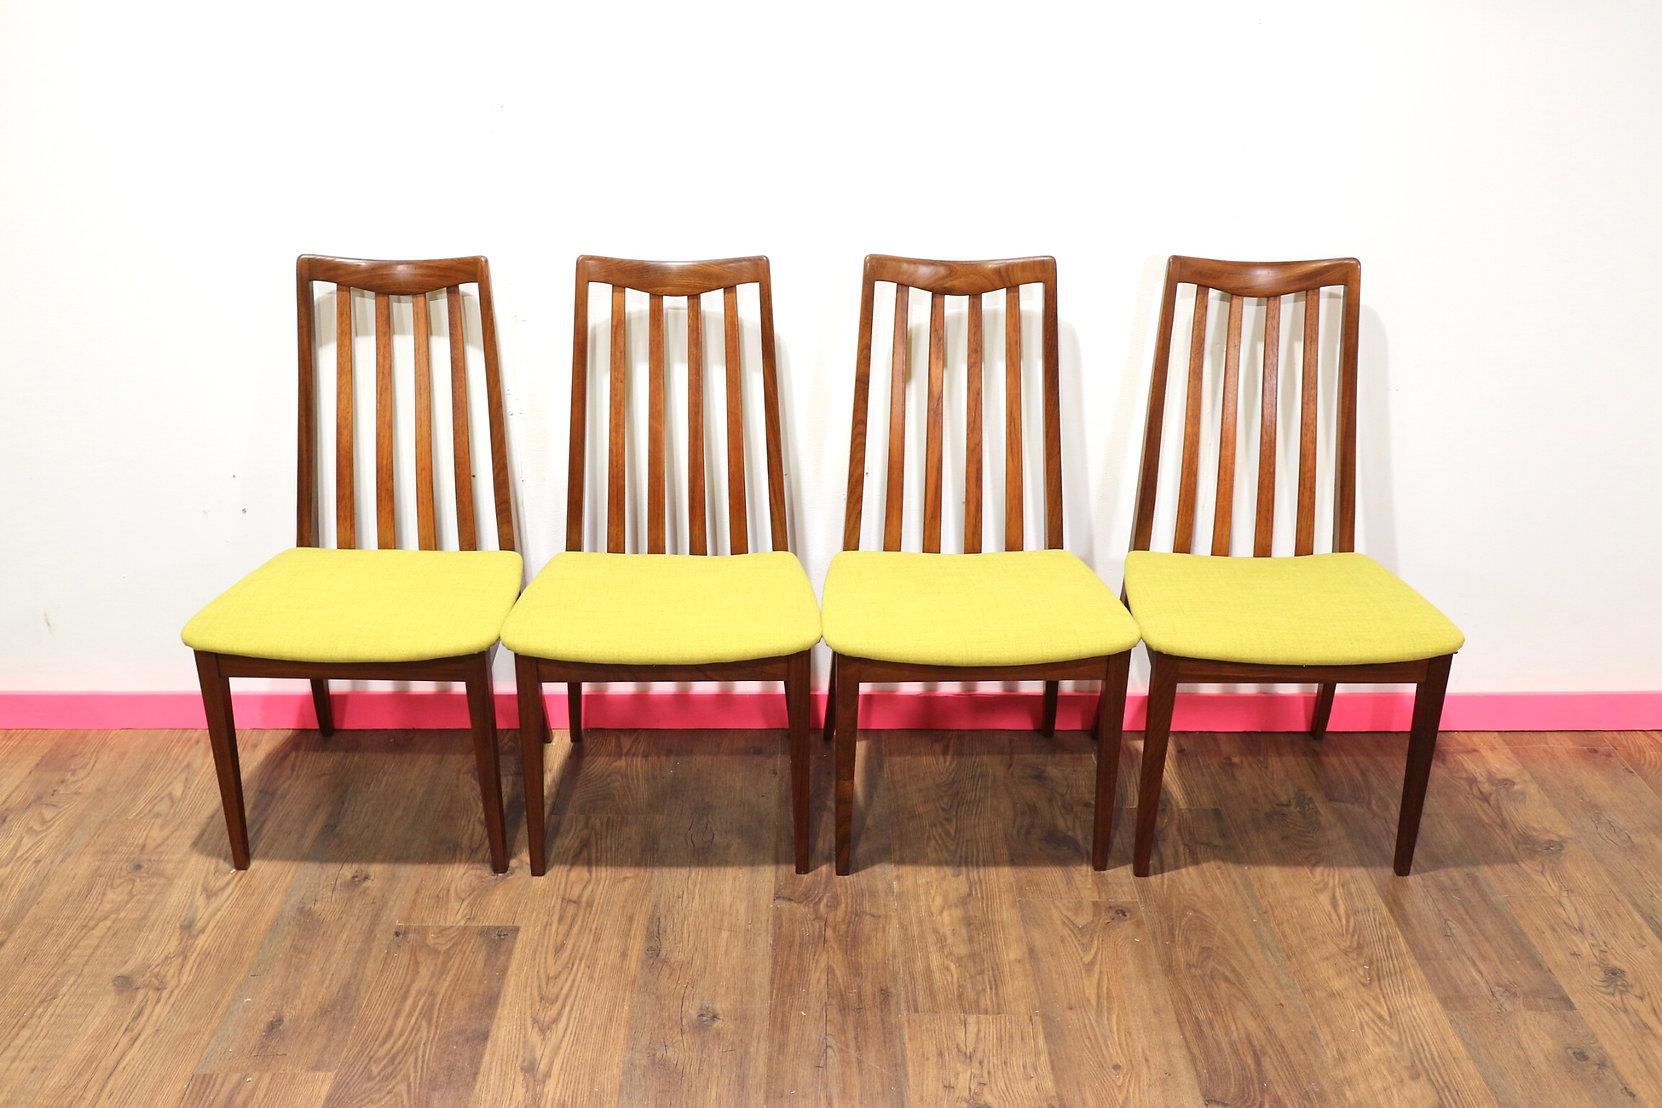 A gorgeous set of 4 G Plan teak framed dining chairs from their Brasillia range. These fabulous chairs have had the seat pads recently upholstored in teal to give them a really striking look. They would look great in any dining room.

